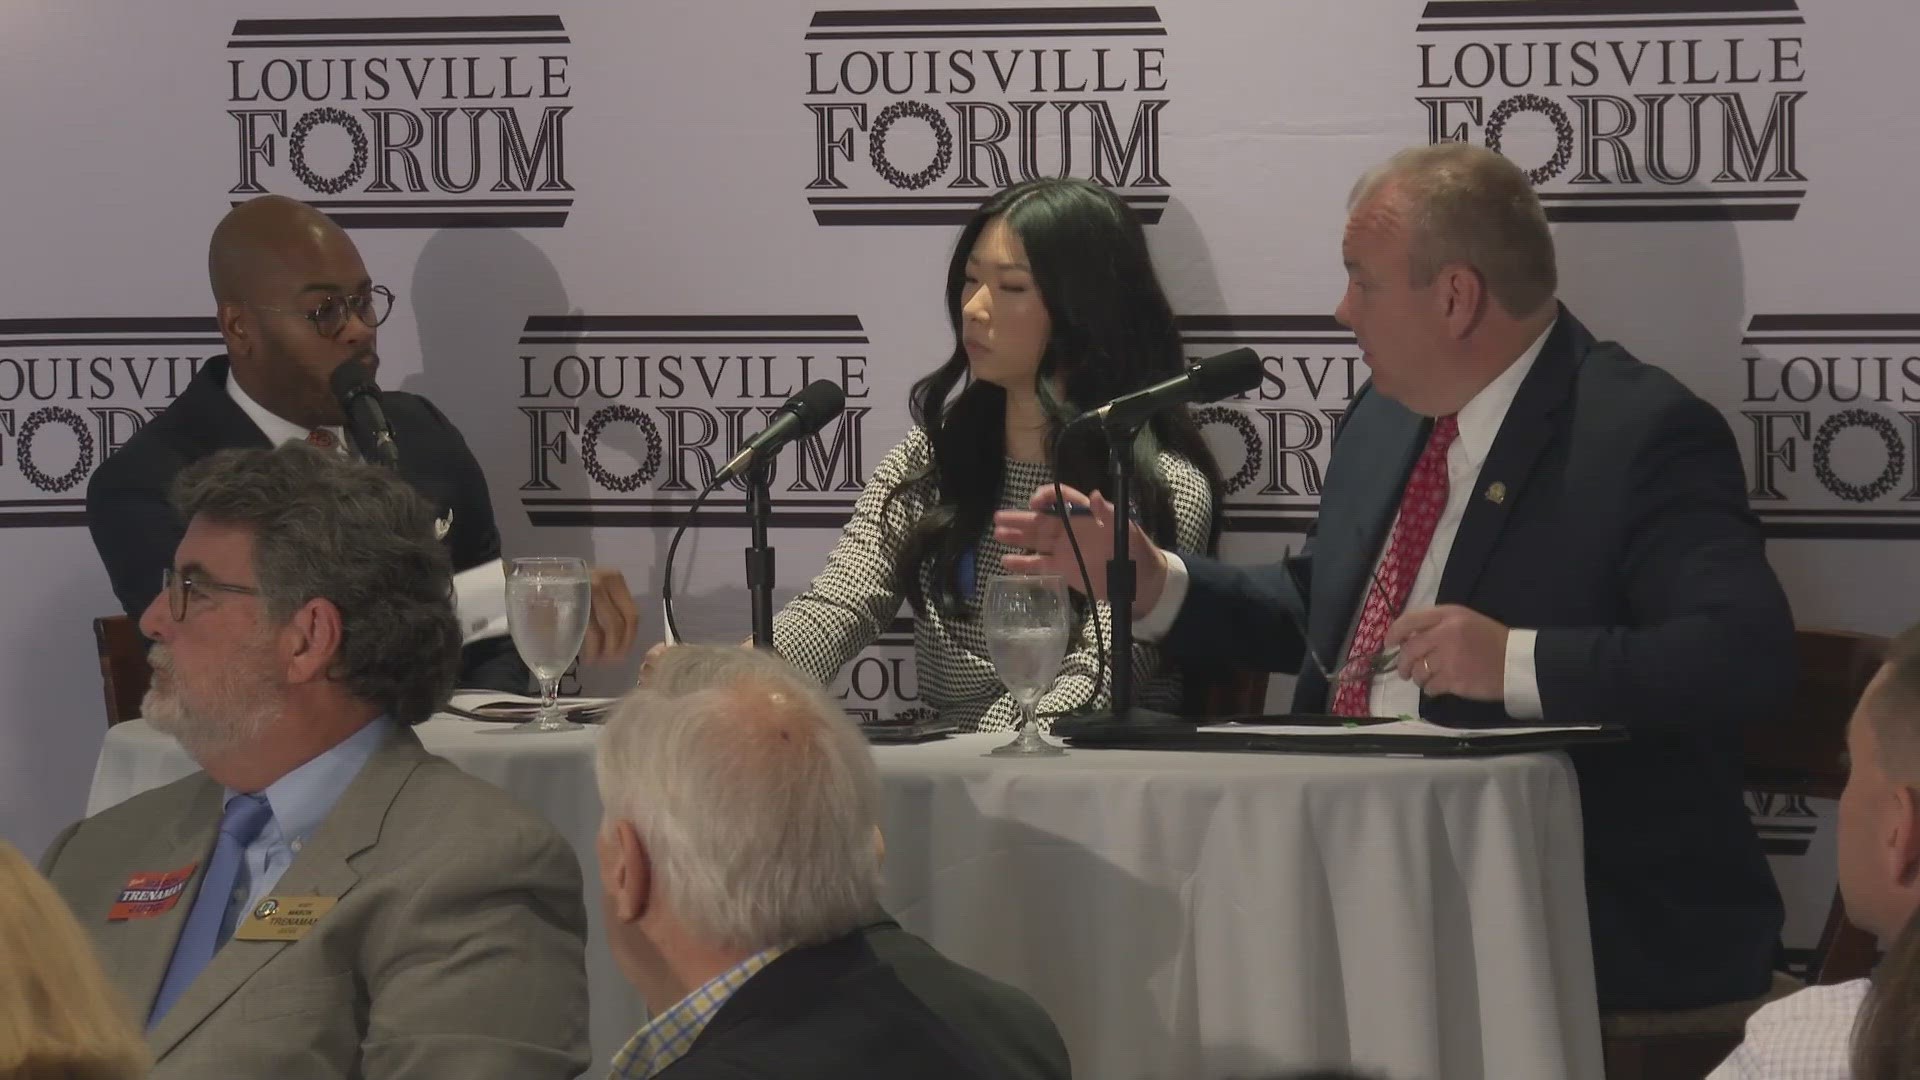 Much of the passionate discussion at the Louisville Forum on Wednesday circled around that first day transportation mess.